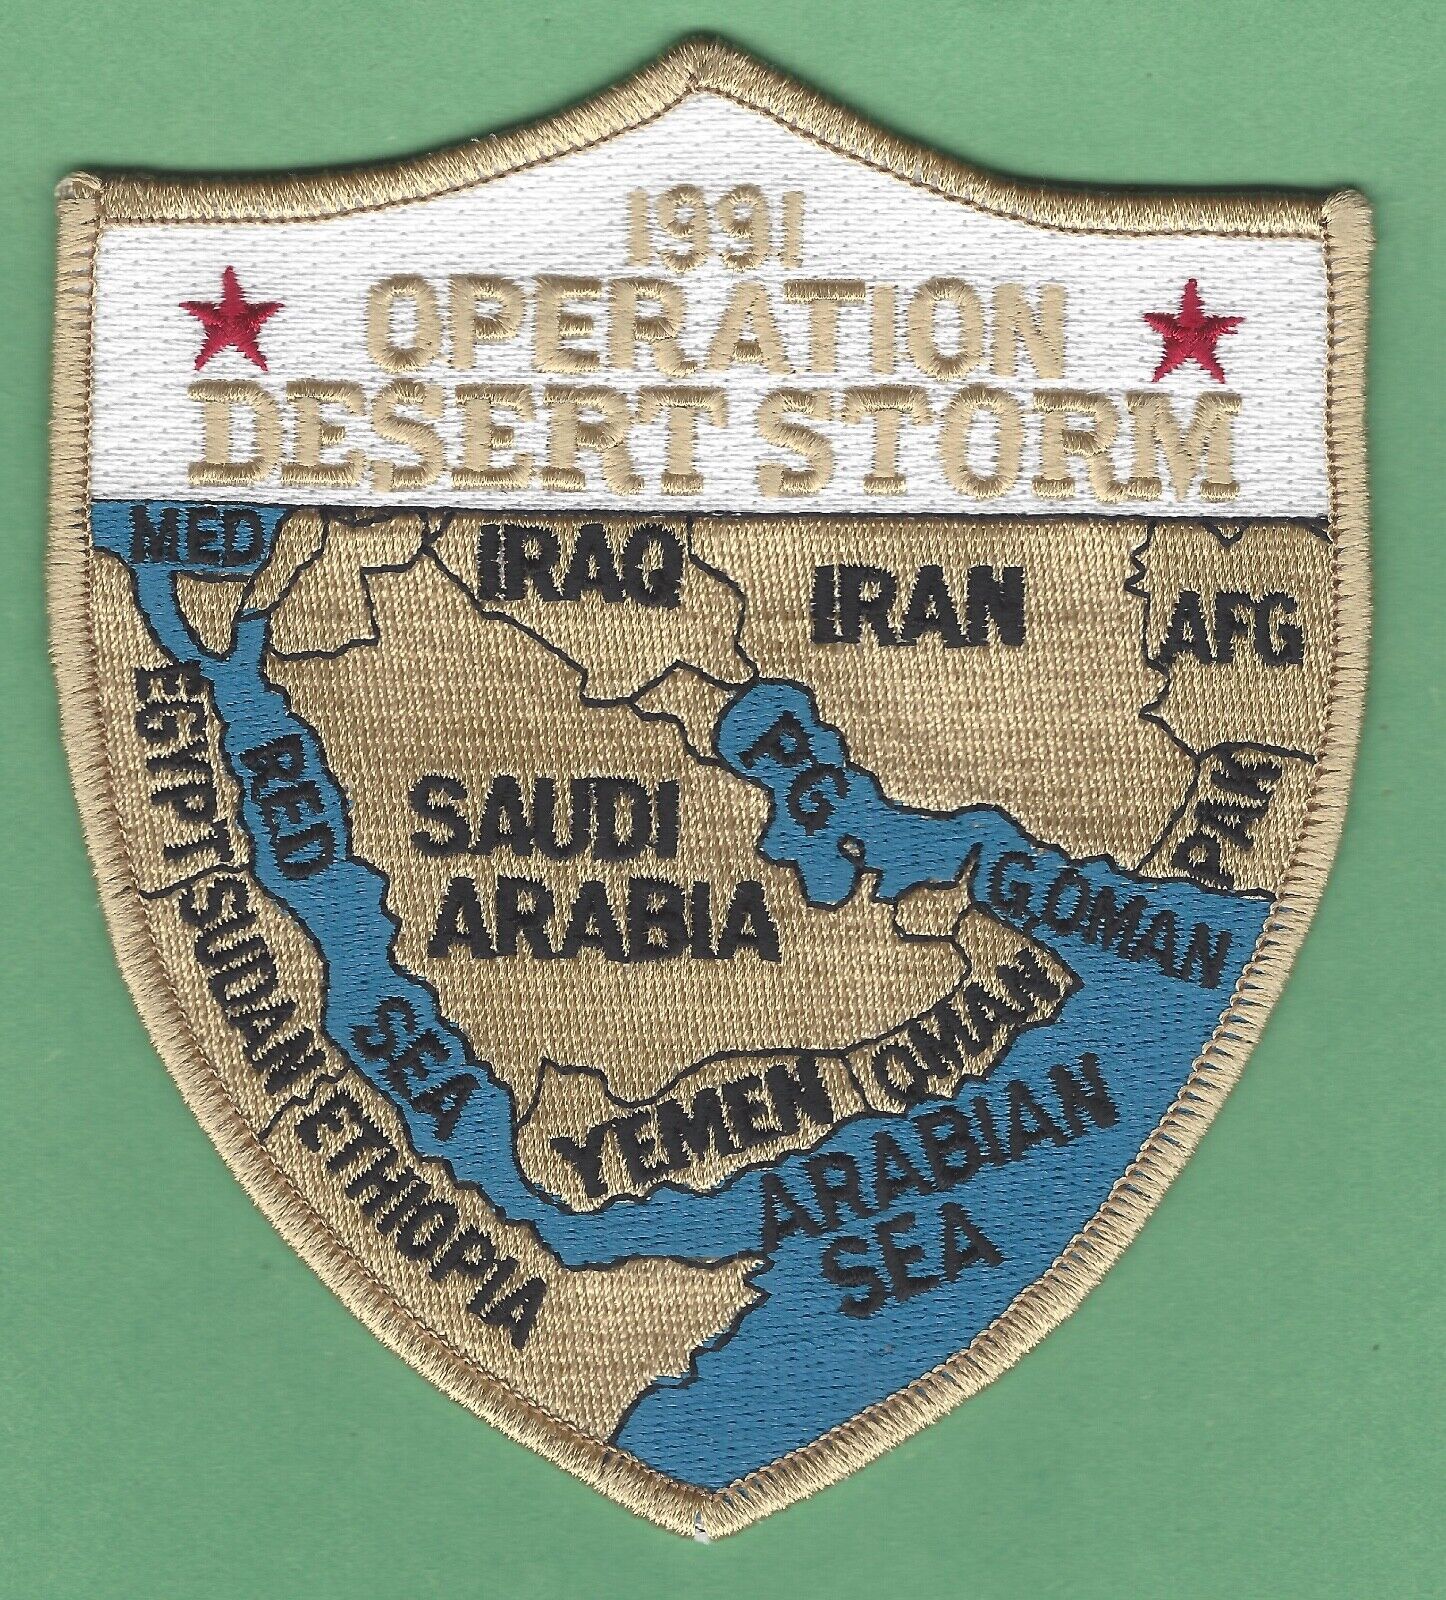 OPERATION DESERT STORM MILITARY CAMPAIGN PATCH MAP